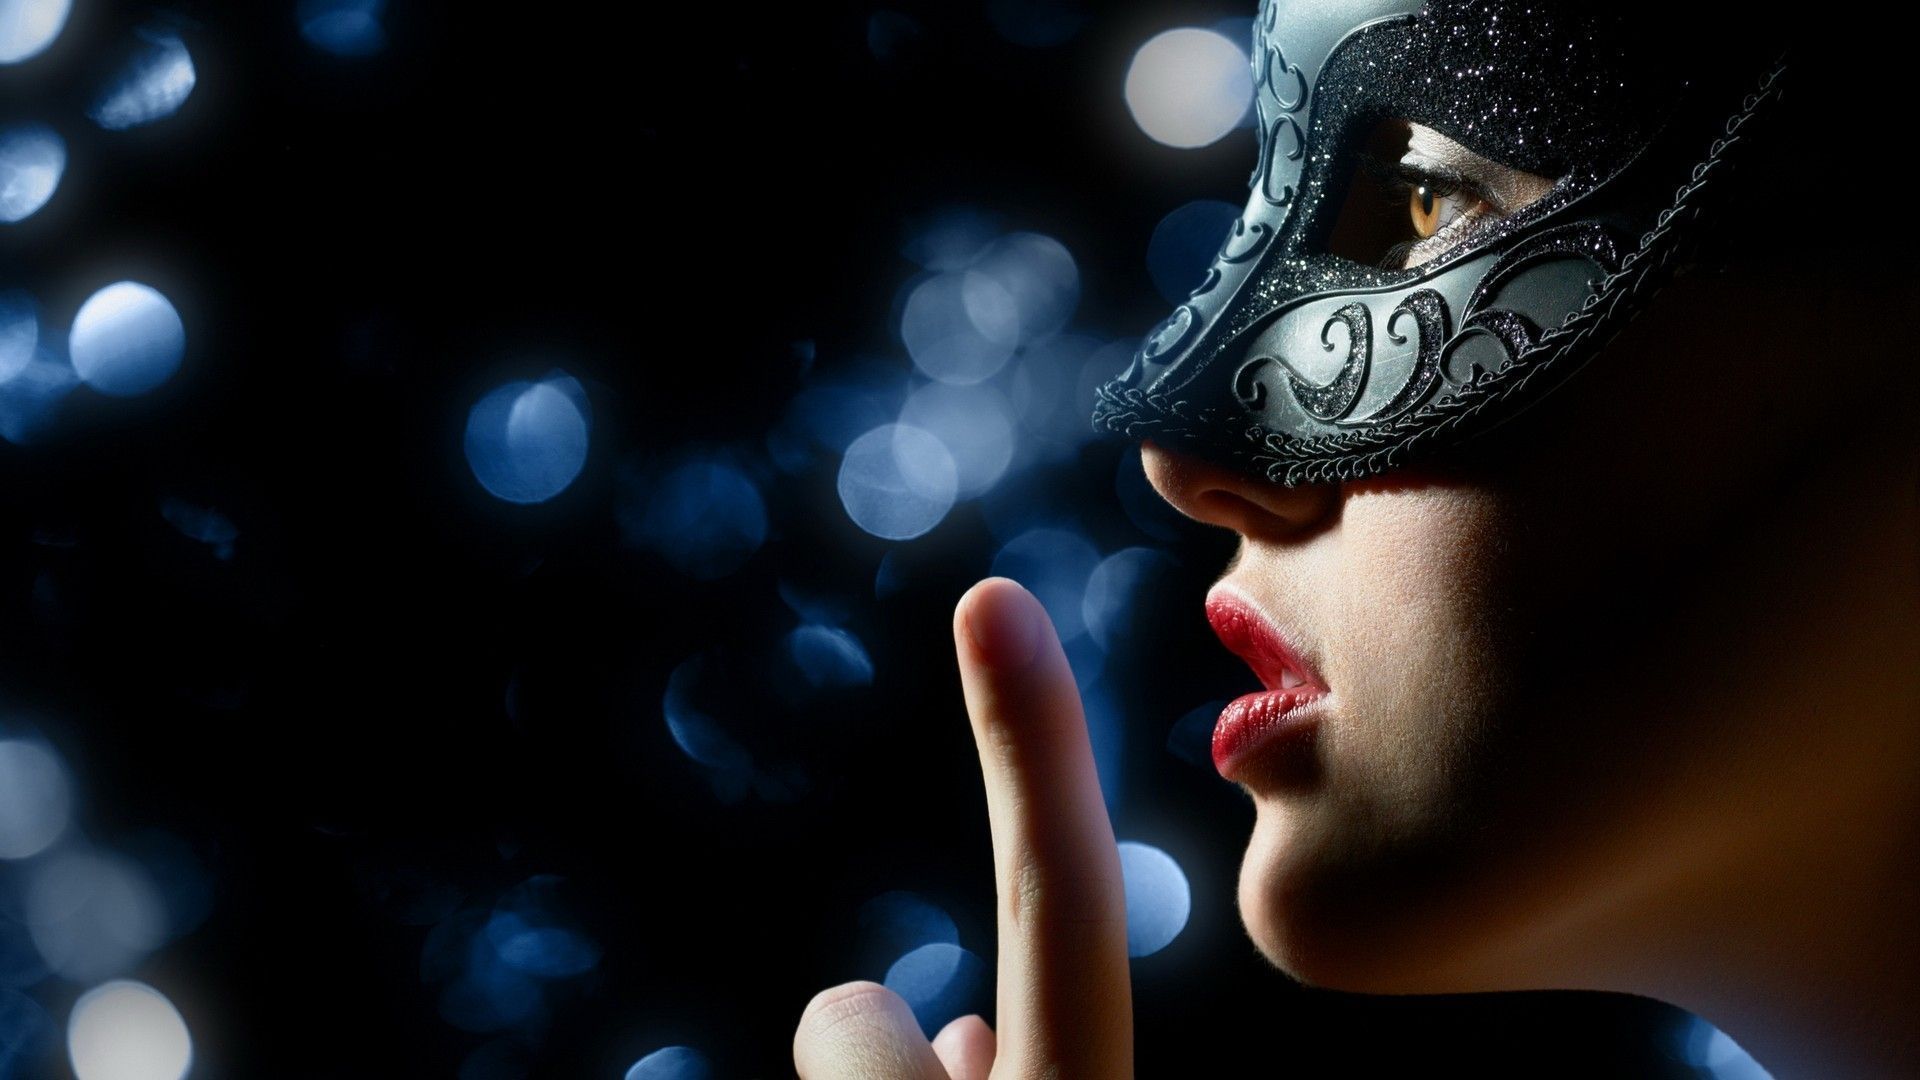 New Masquerade Mask High Defination Wallpapers - All HD Wallpapers